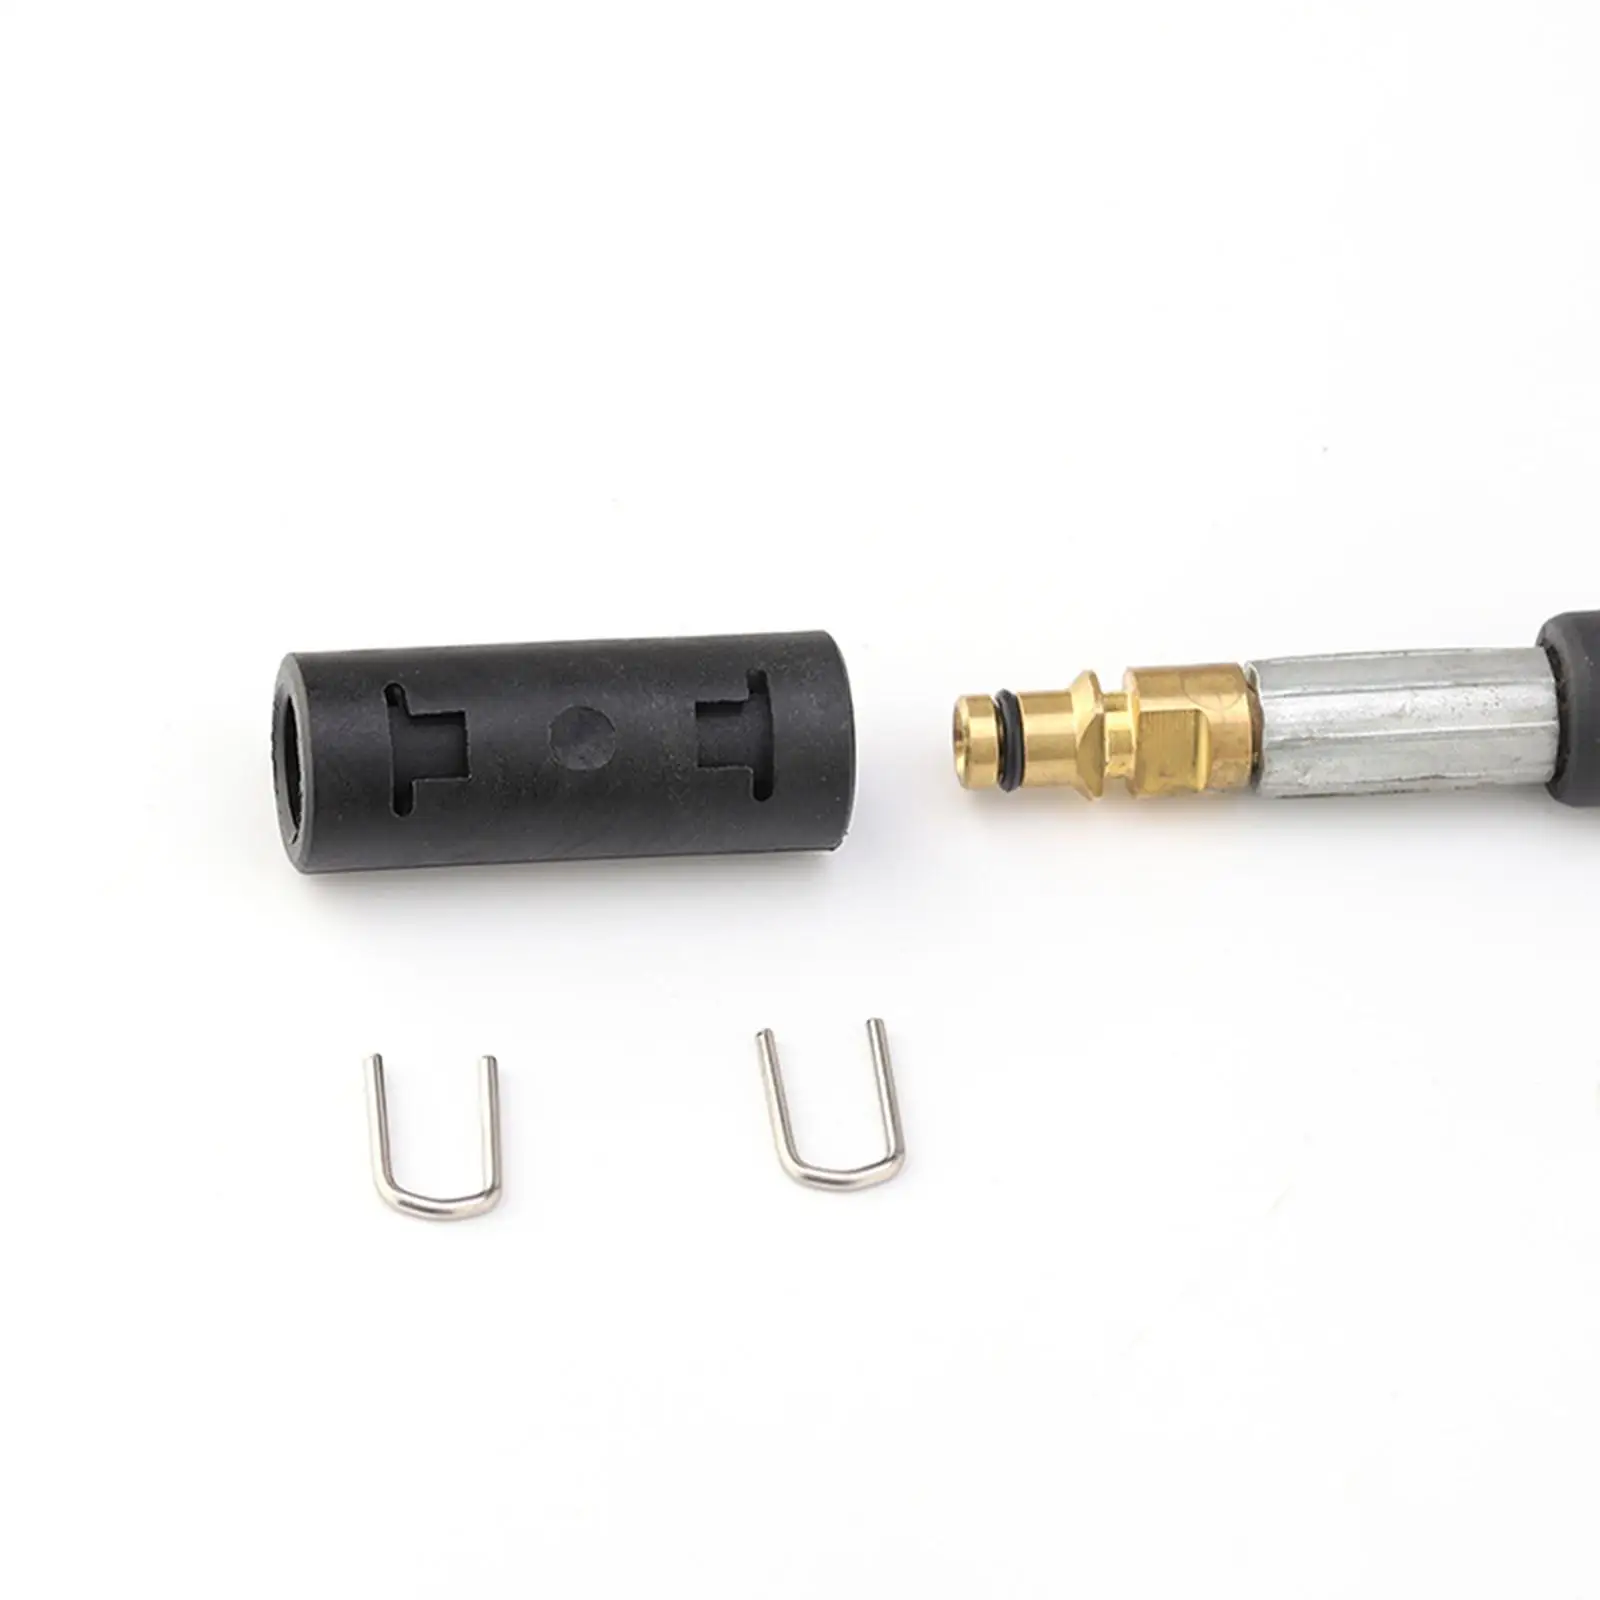 Extension Connector Replace Quick Disconnect Plastic Joint Adapter for K Series K7 K2 K5 High Pressure Washer Hose